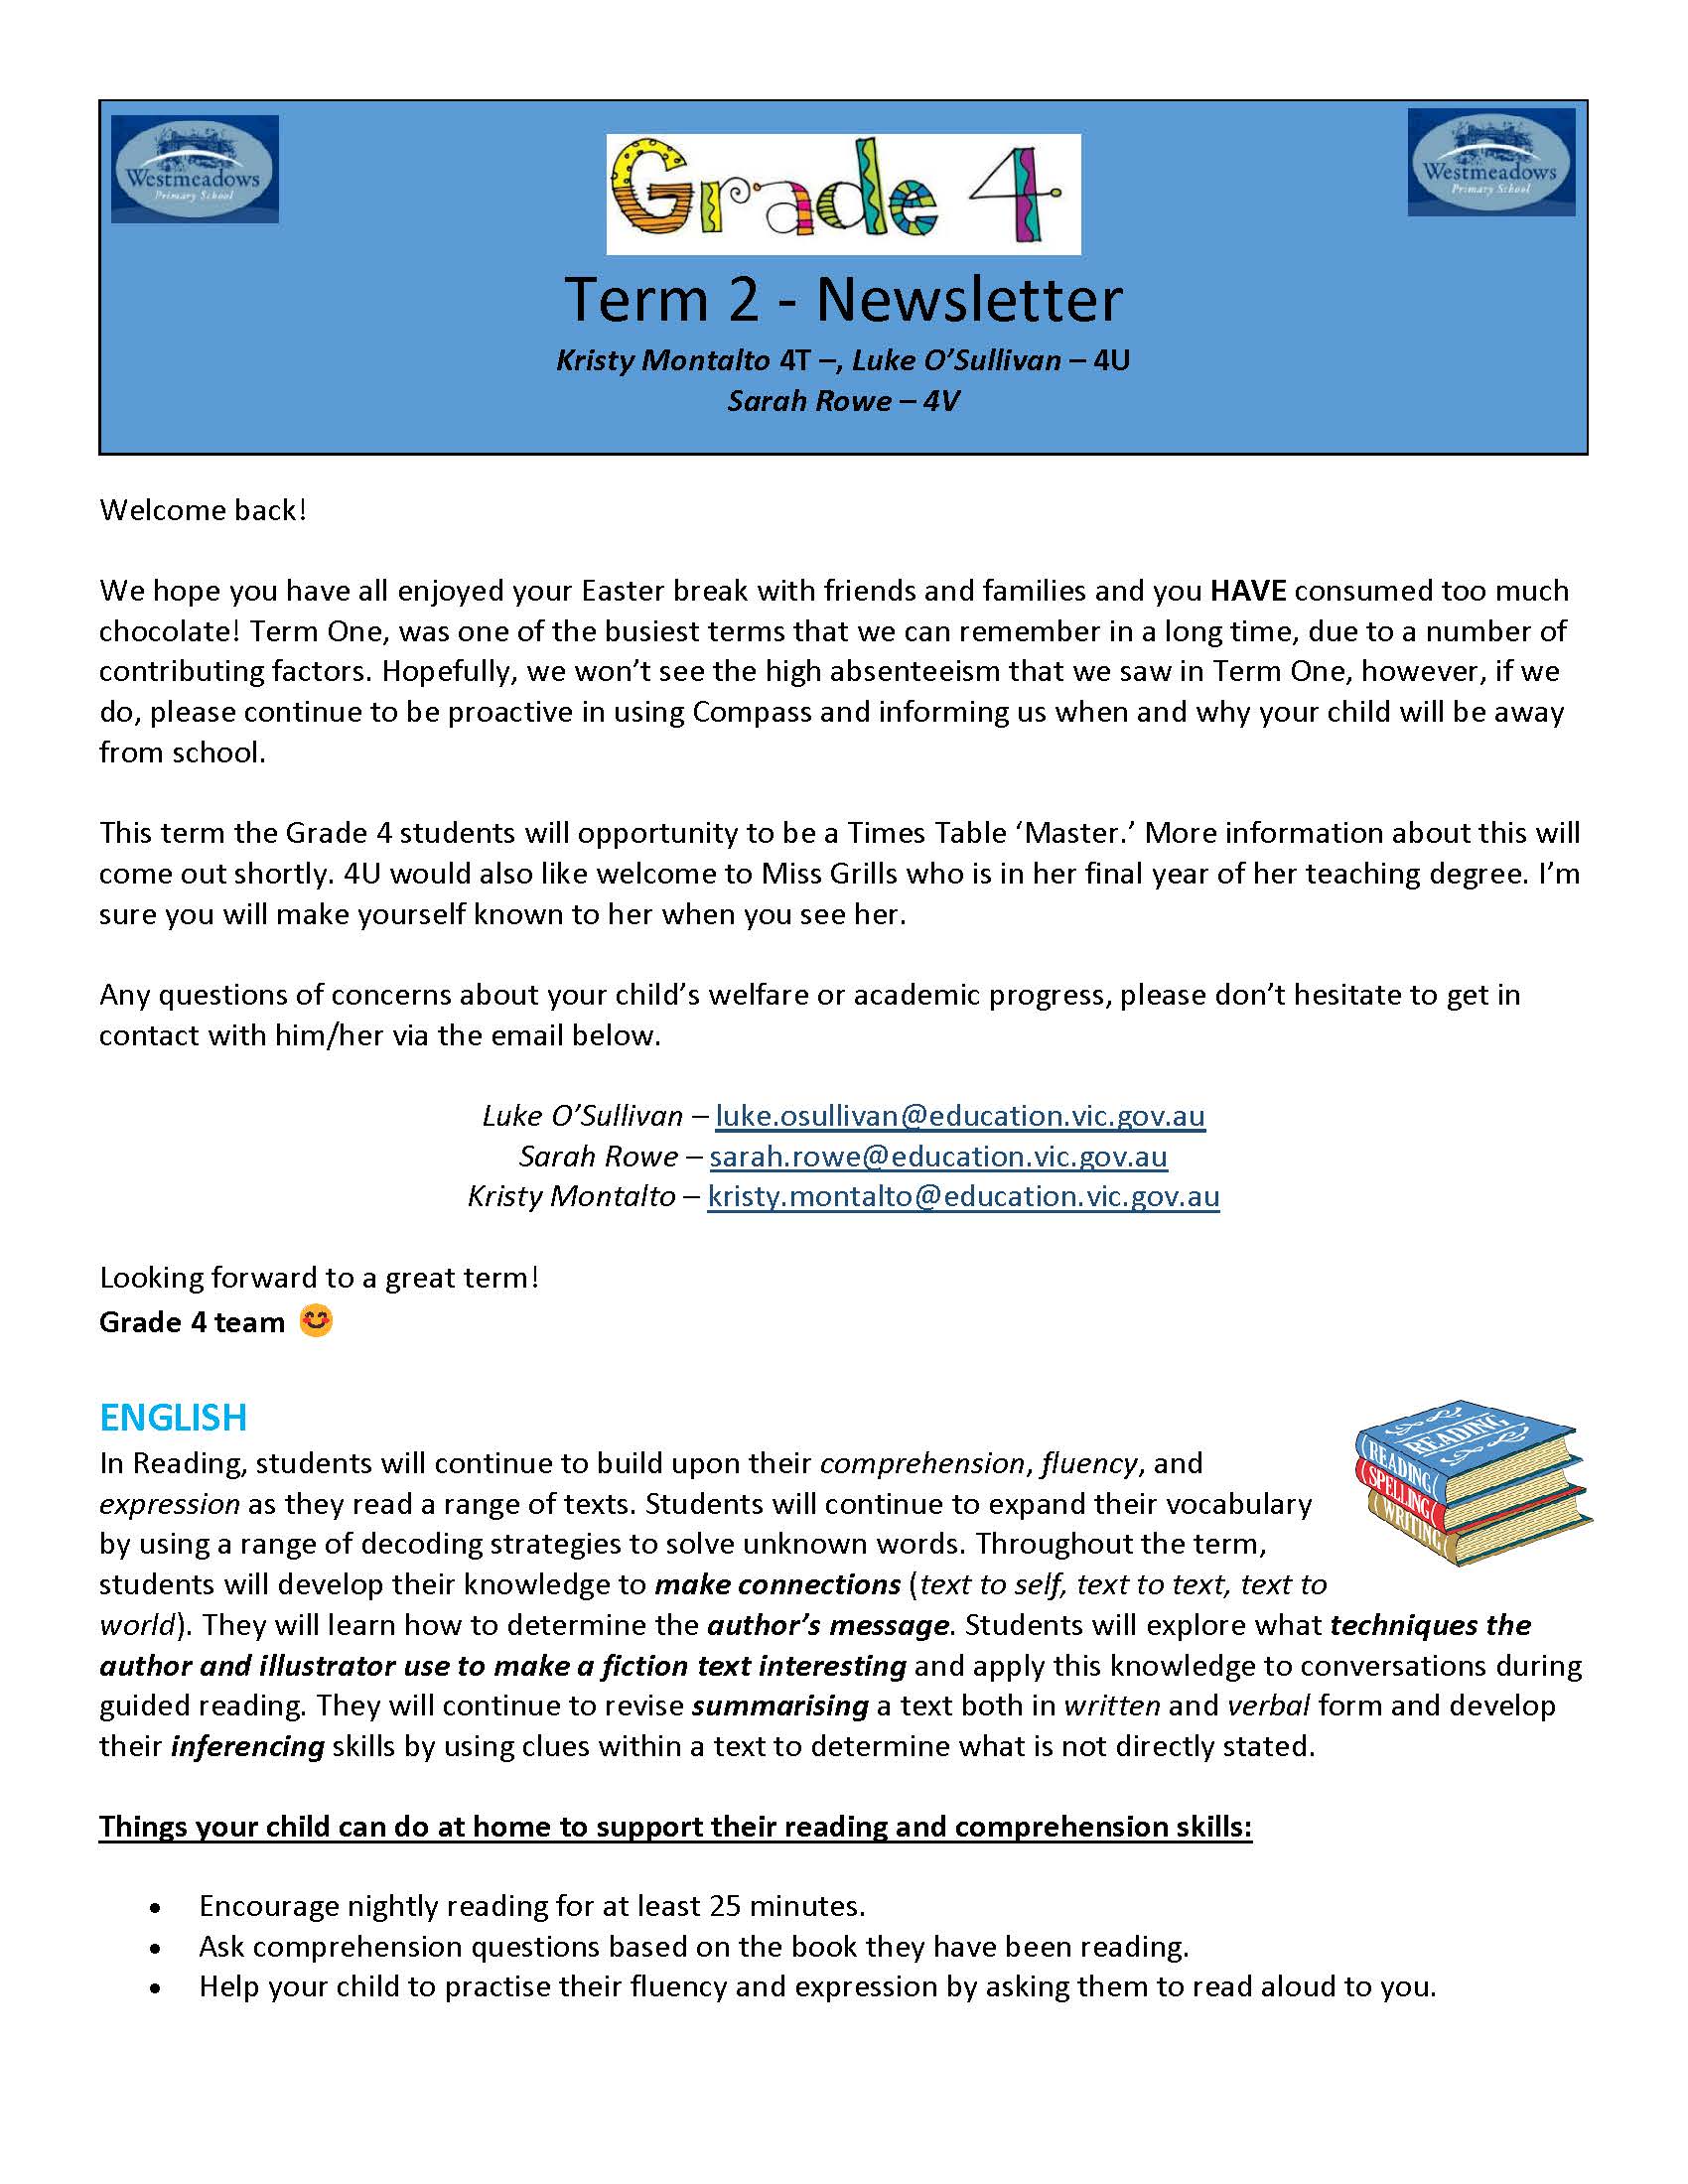 Grade 4 Term 2, 2022 Newsletter_Page_1